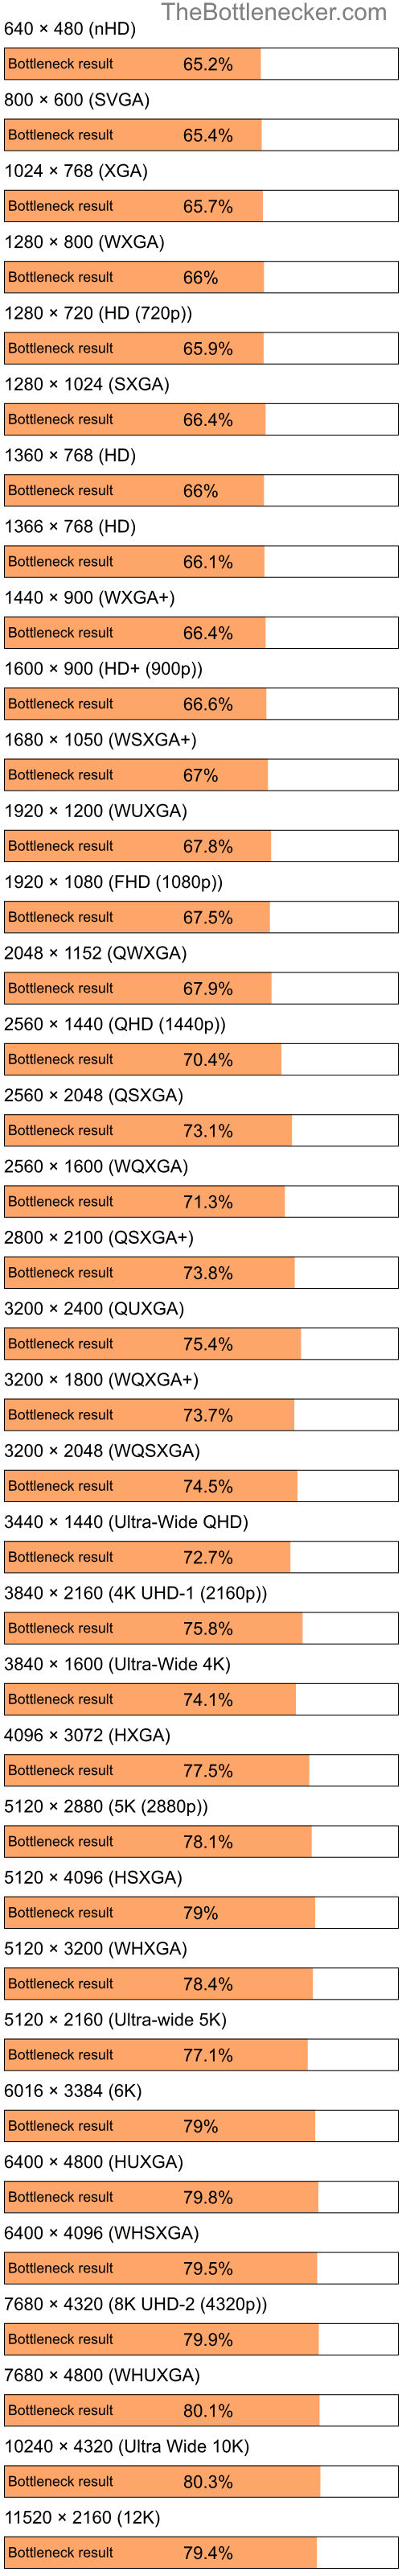 Bottleneck results by resolution for Intel Atom N280 and NVIDIA GeForce 8300 in7 Days to Die